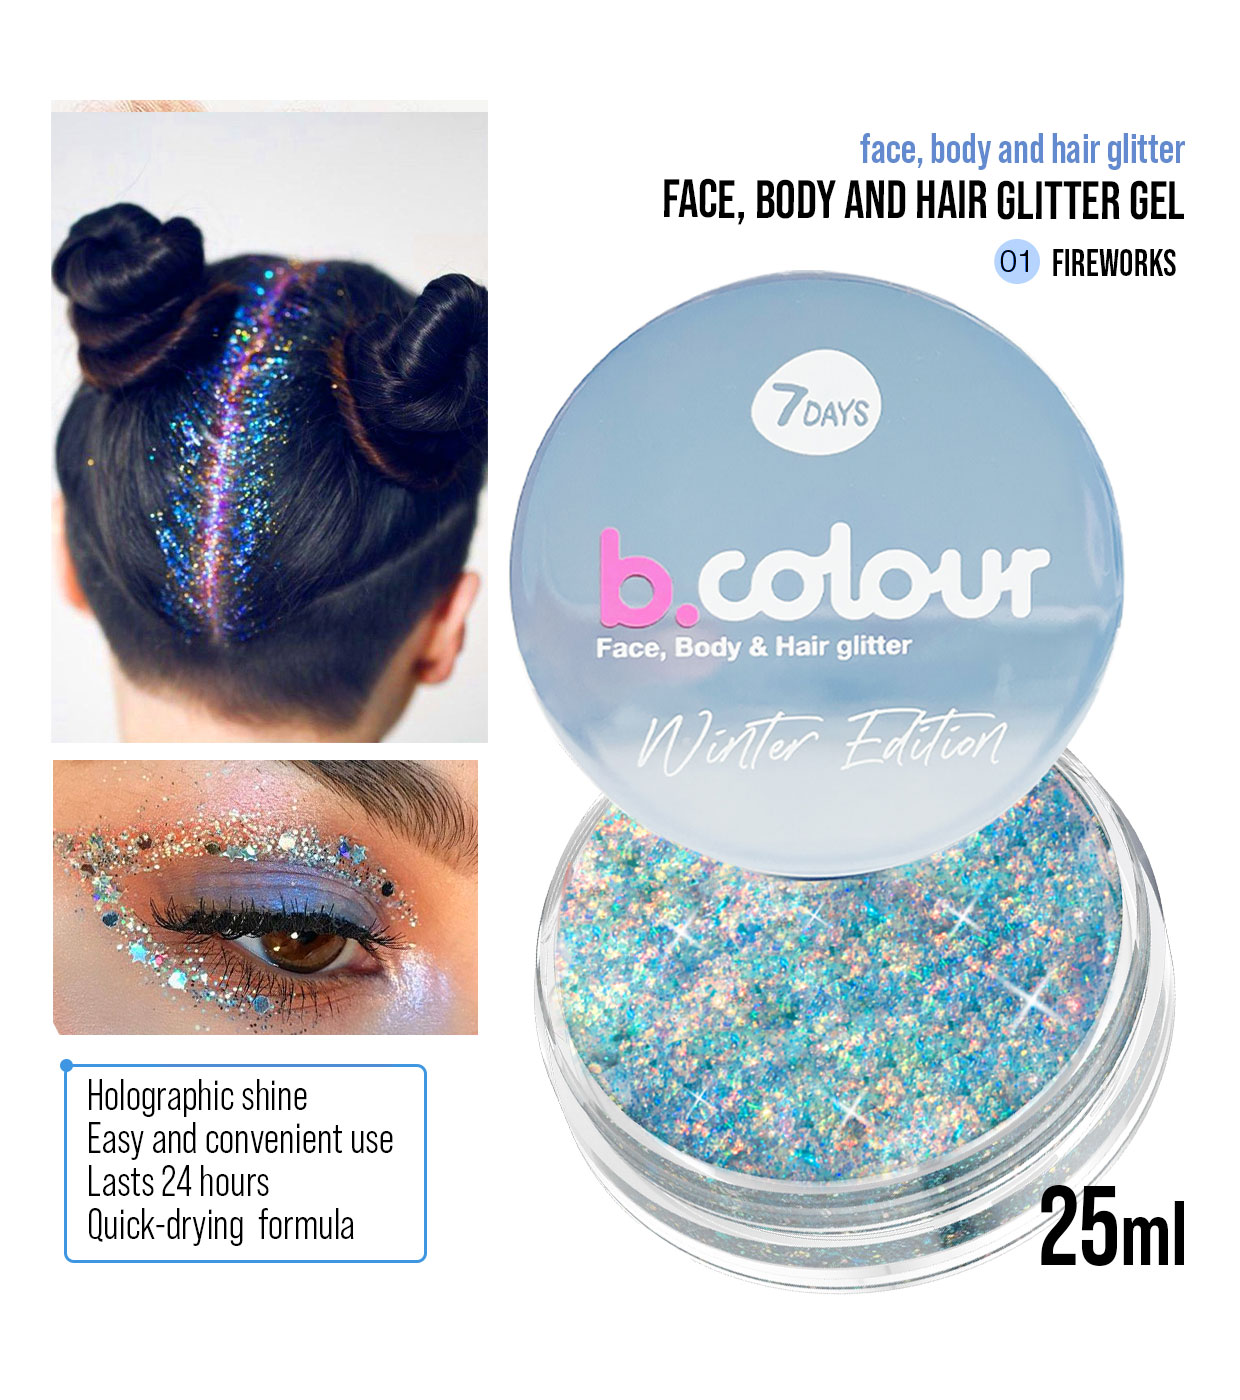 BH Cosmetics - Come thru, glitter! New shades to light up your face, body  and hair with some multi-dimensional, ~vegan~ shine in our Ho Ho Holidays:  OMG Glitter! - Face & Body